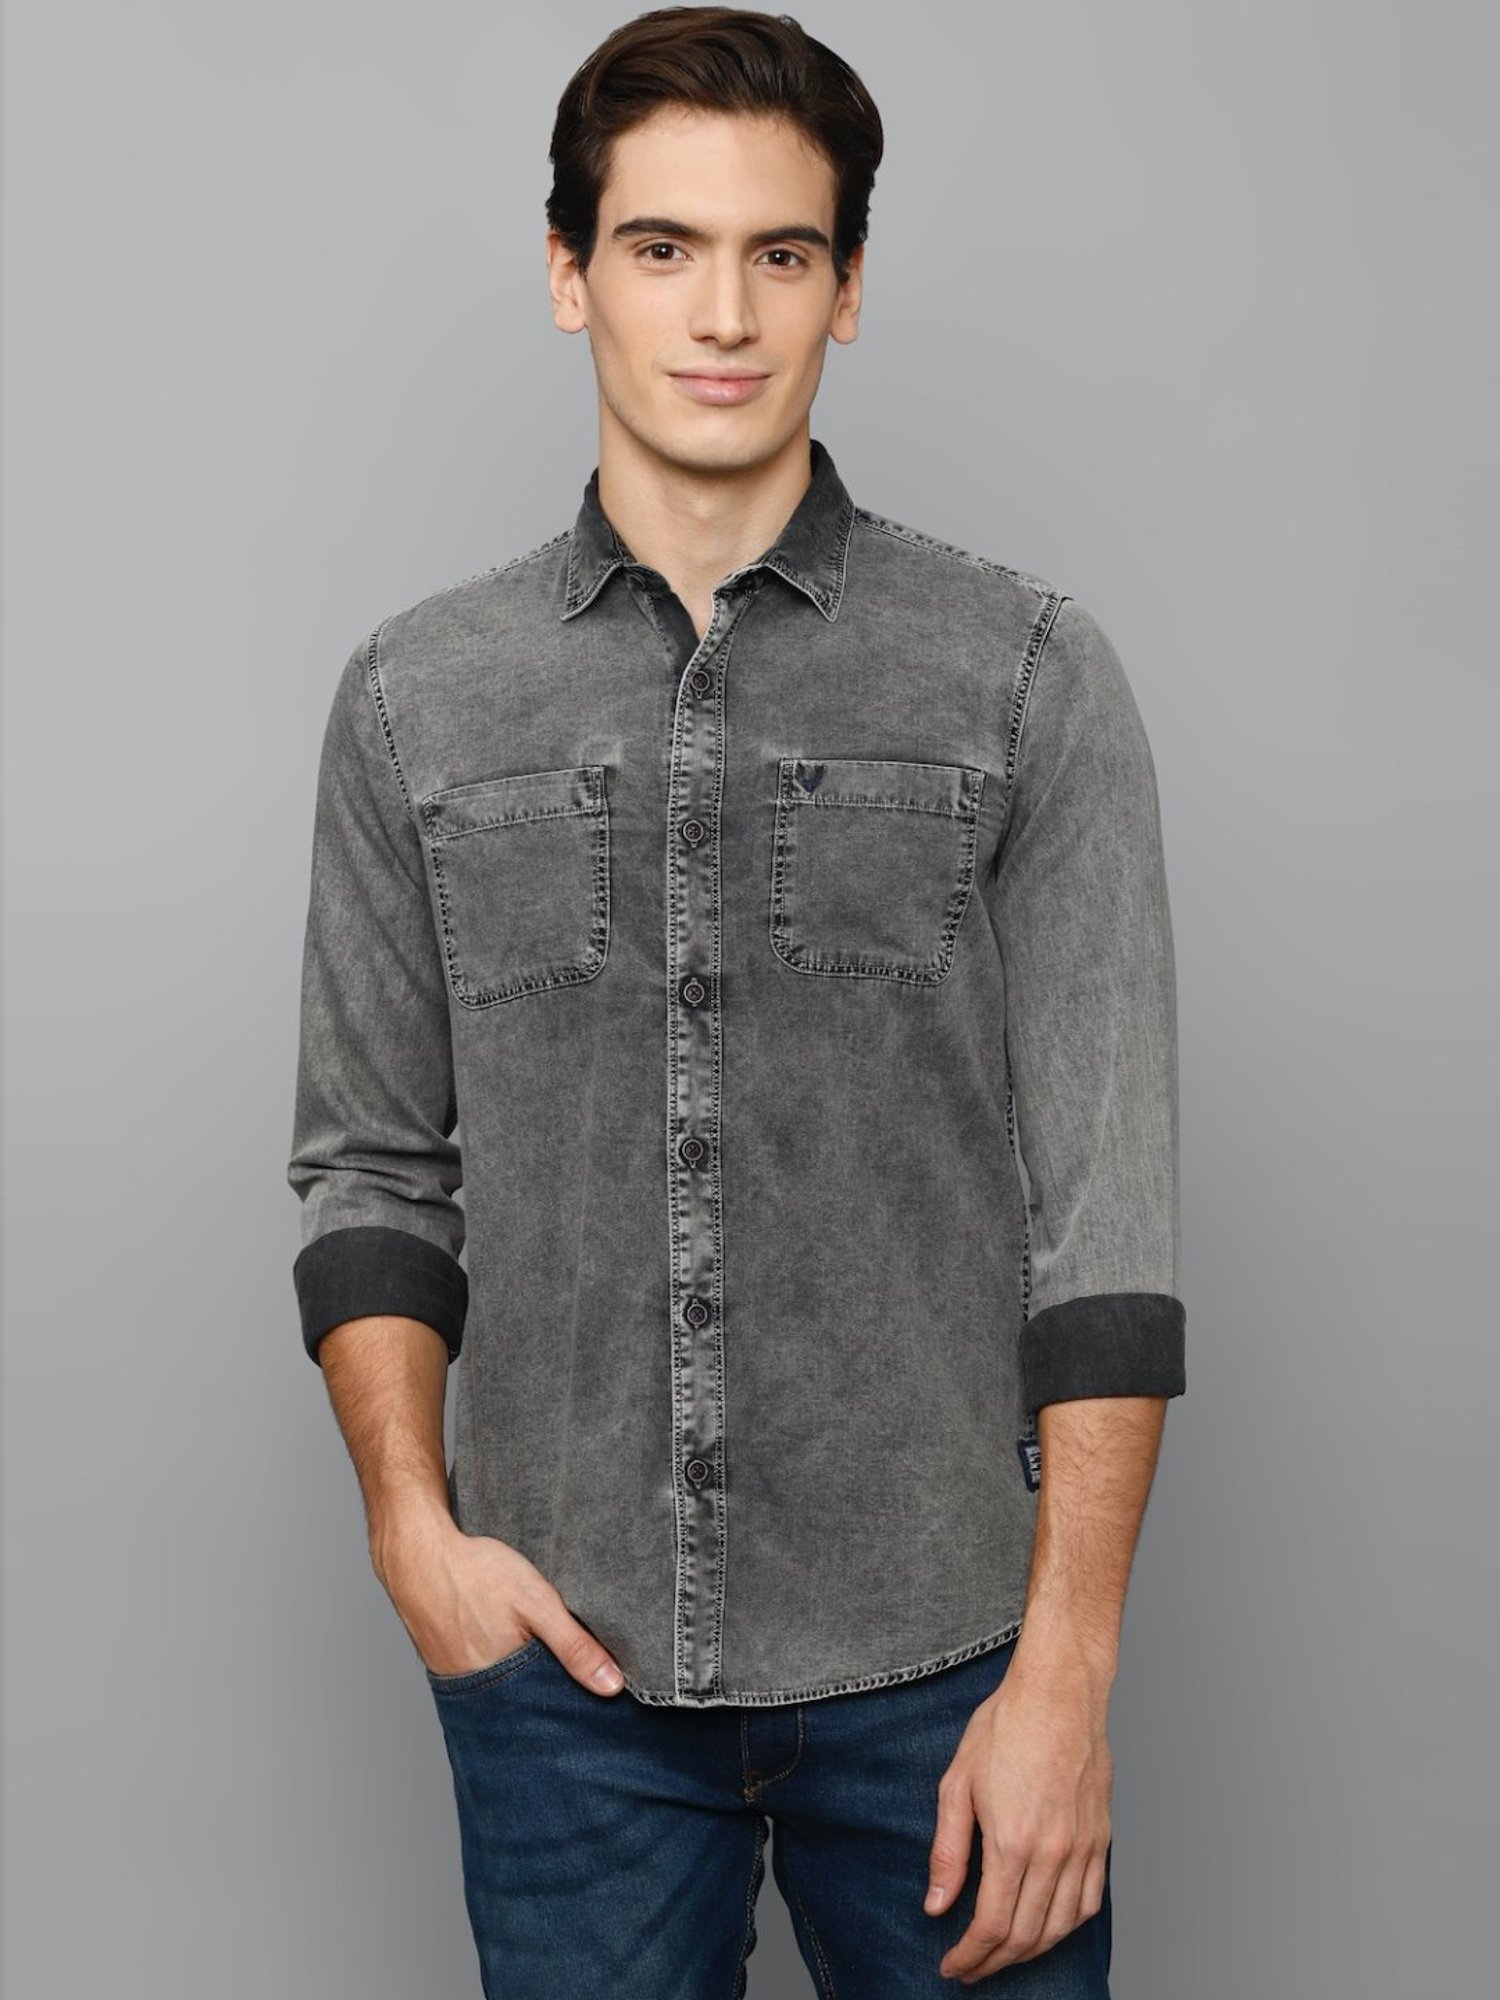 Buy Allen Solly Men White Printed Slim Fit Casual Shirt Online at Low  Prices in India - Paytmmall.com